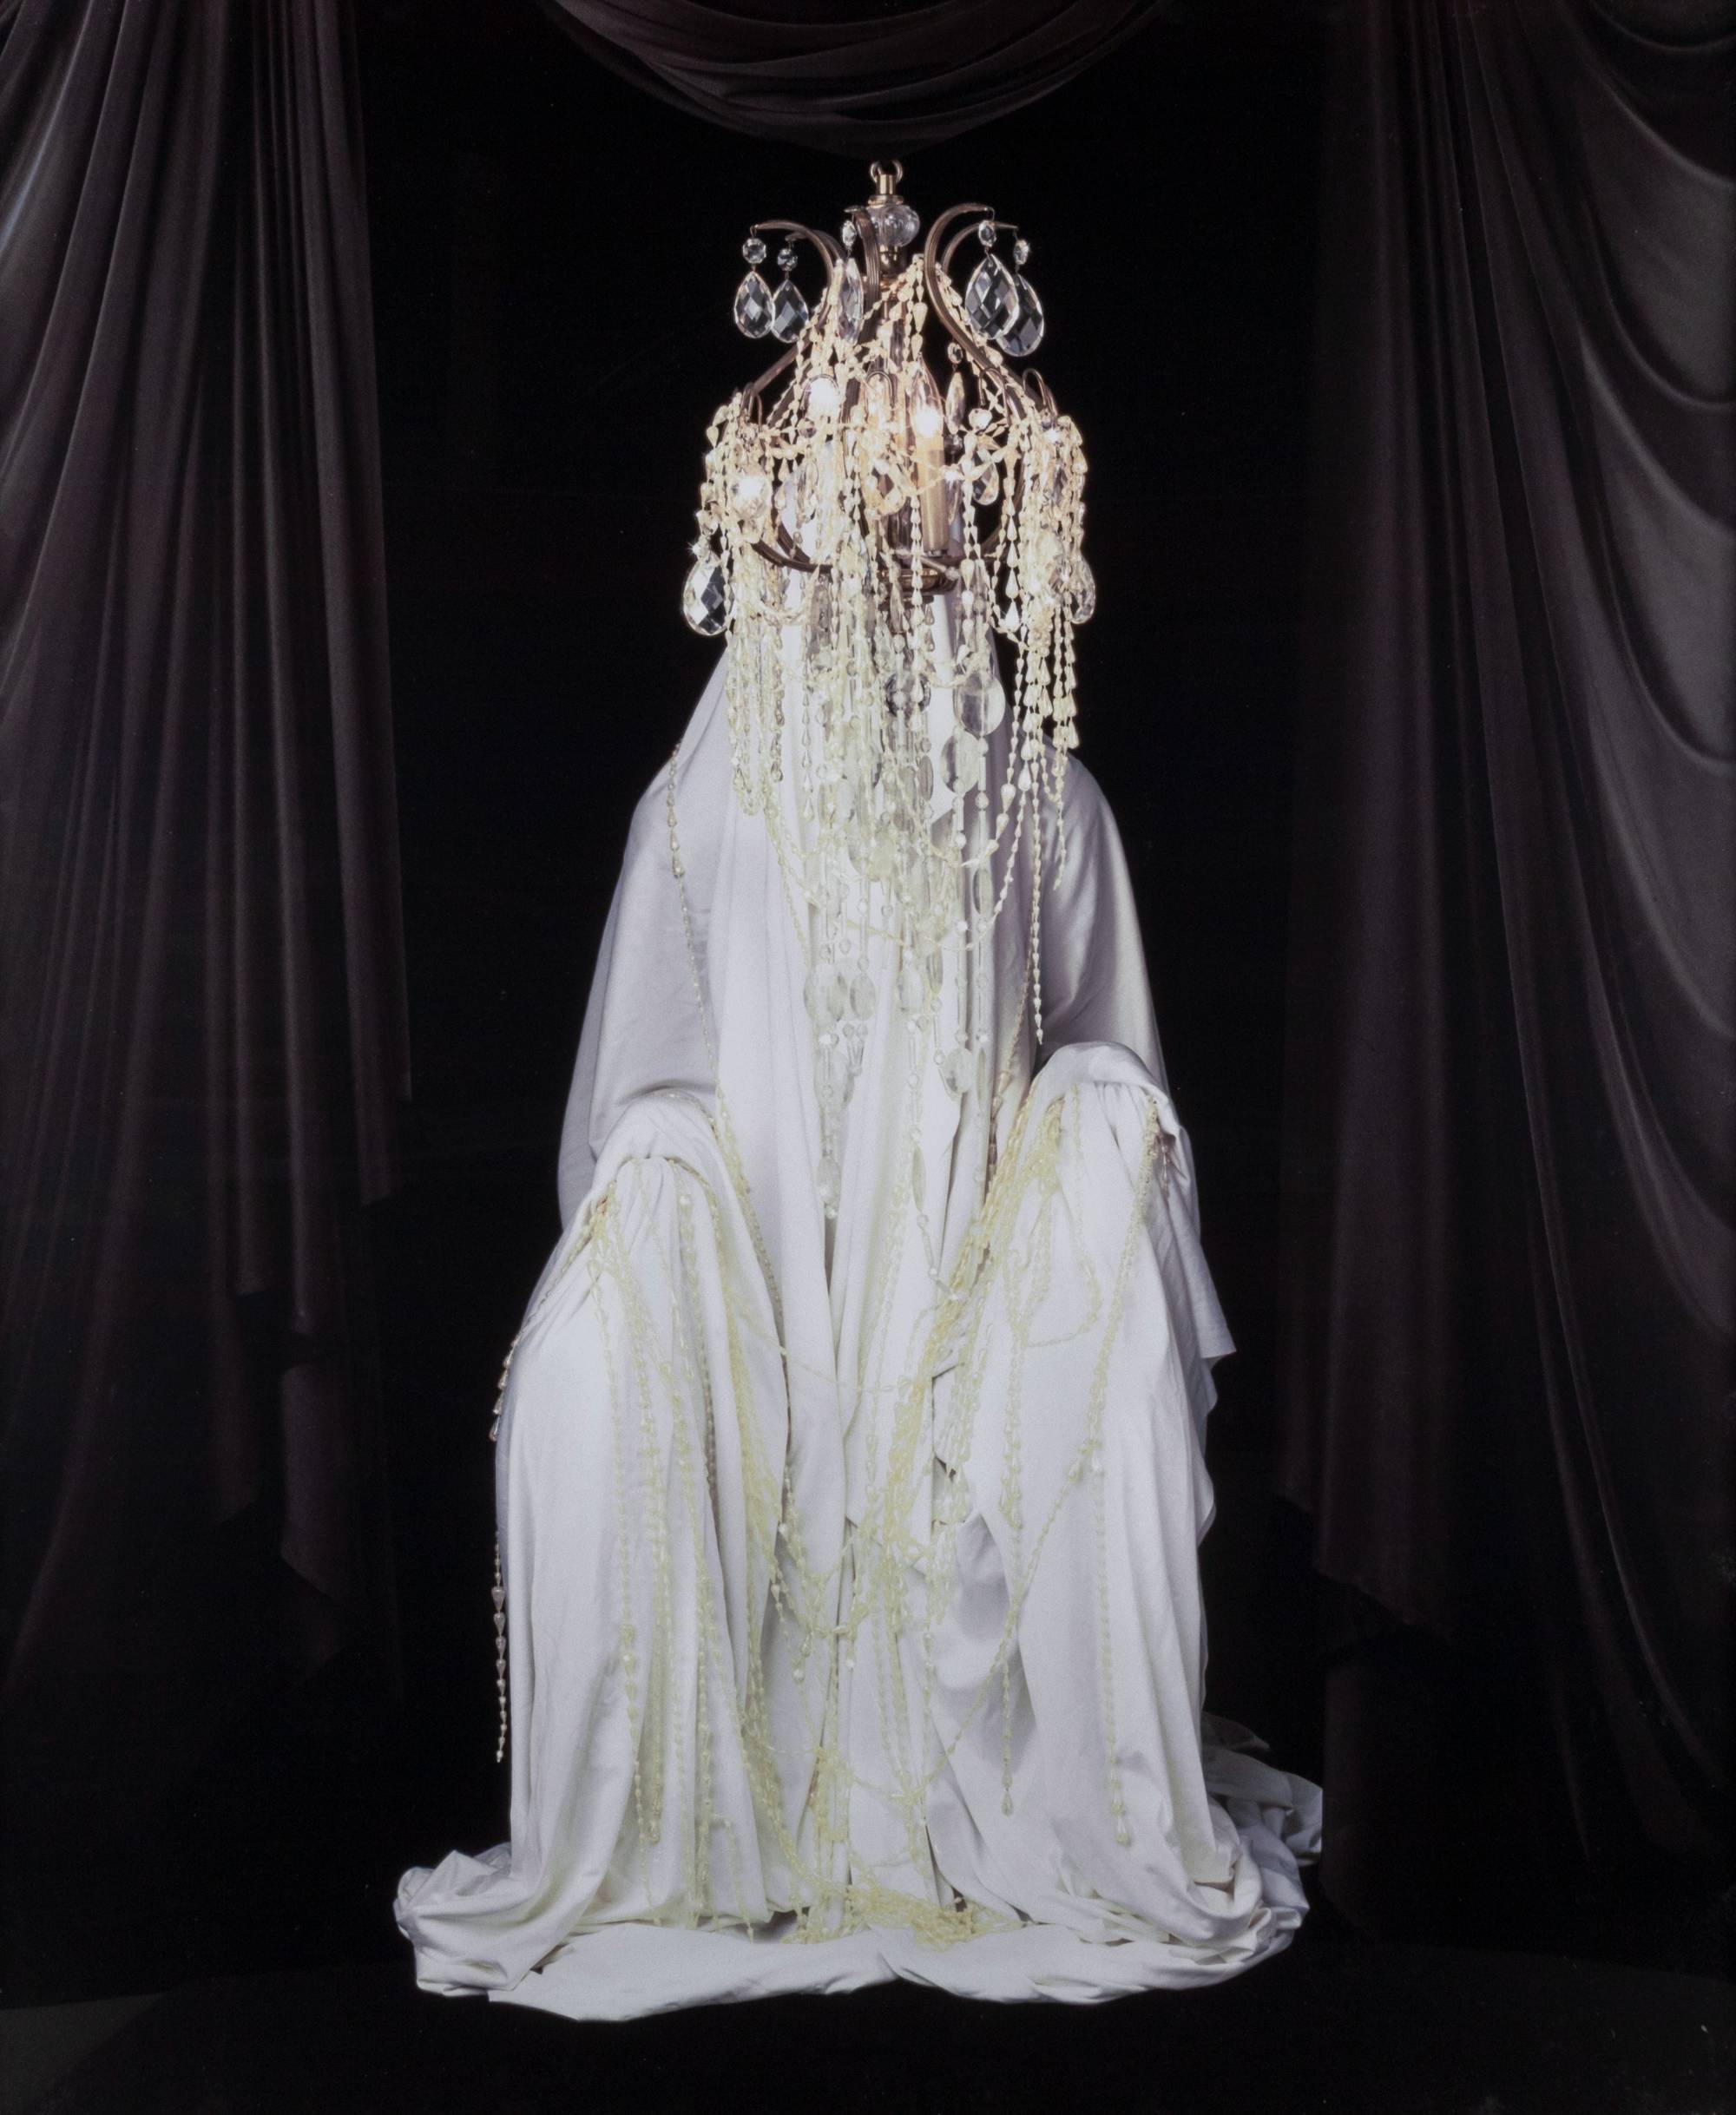 female figure draped with table clothe and chandelier